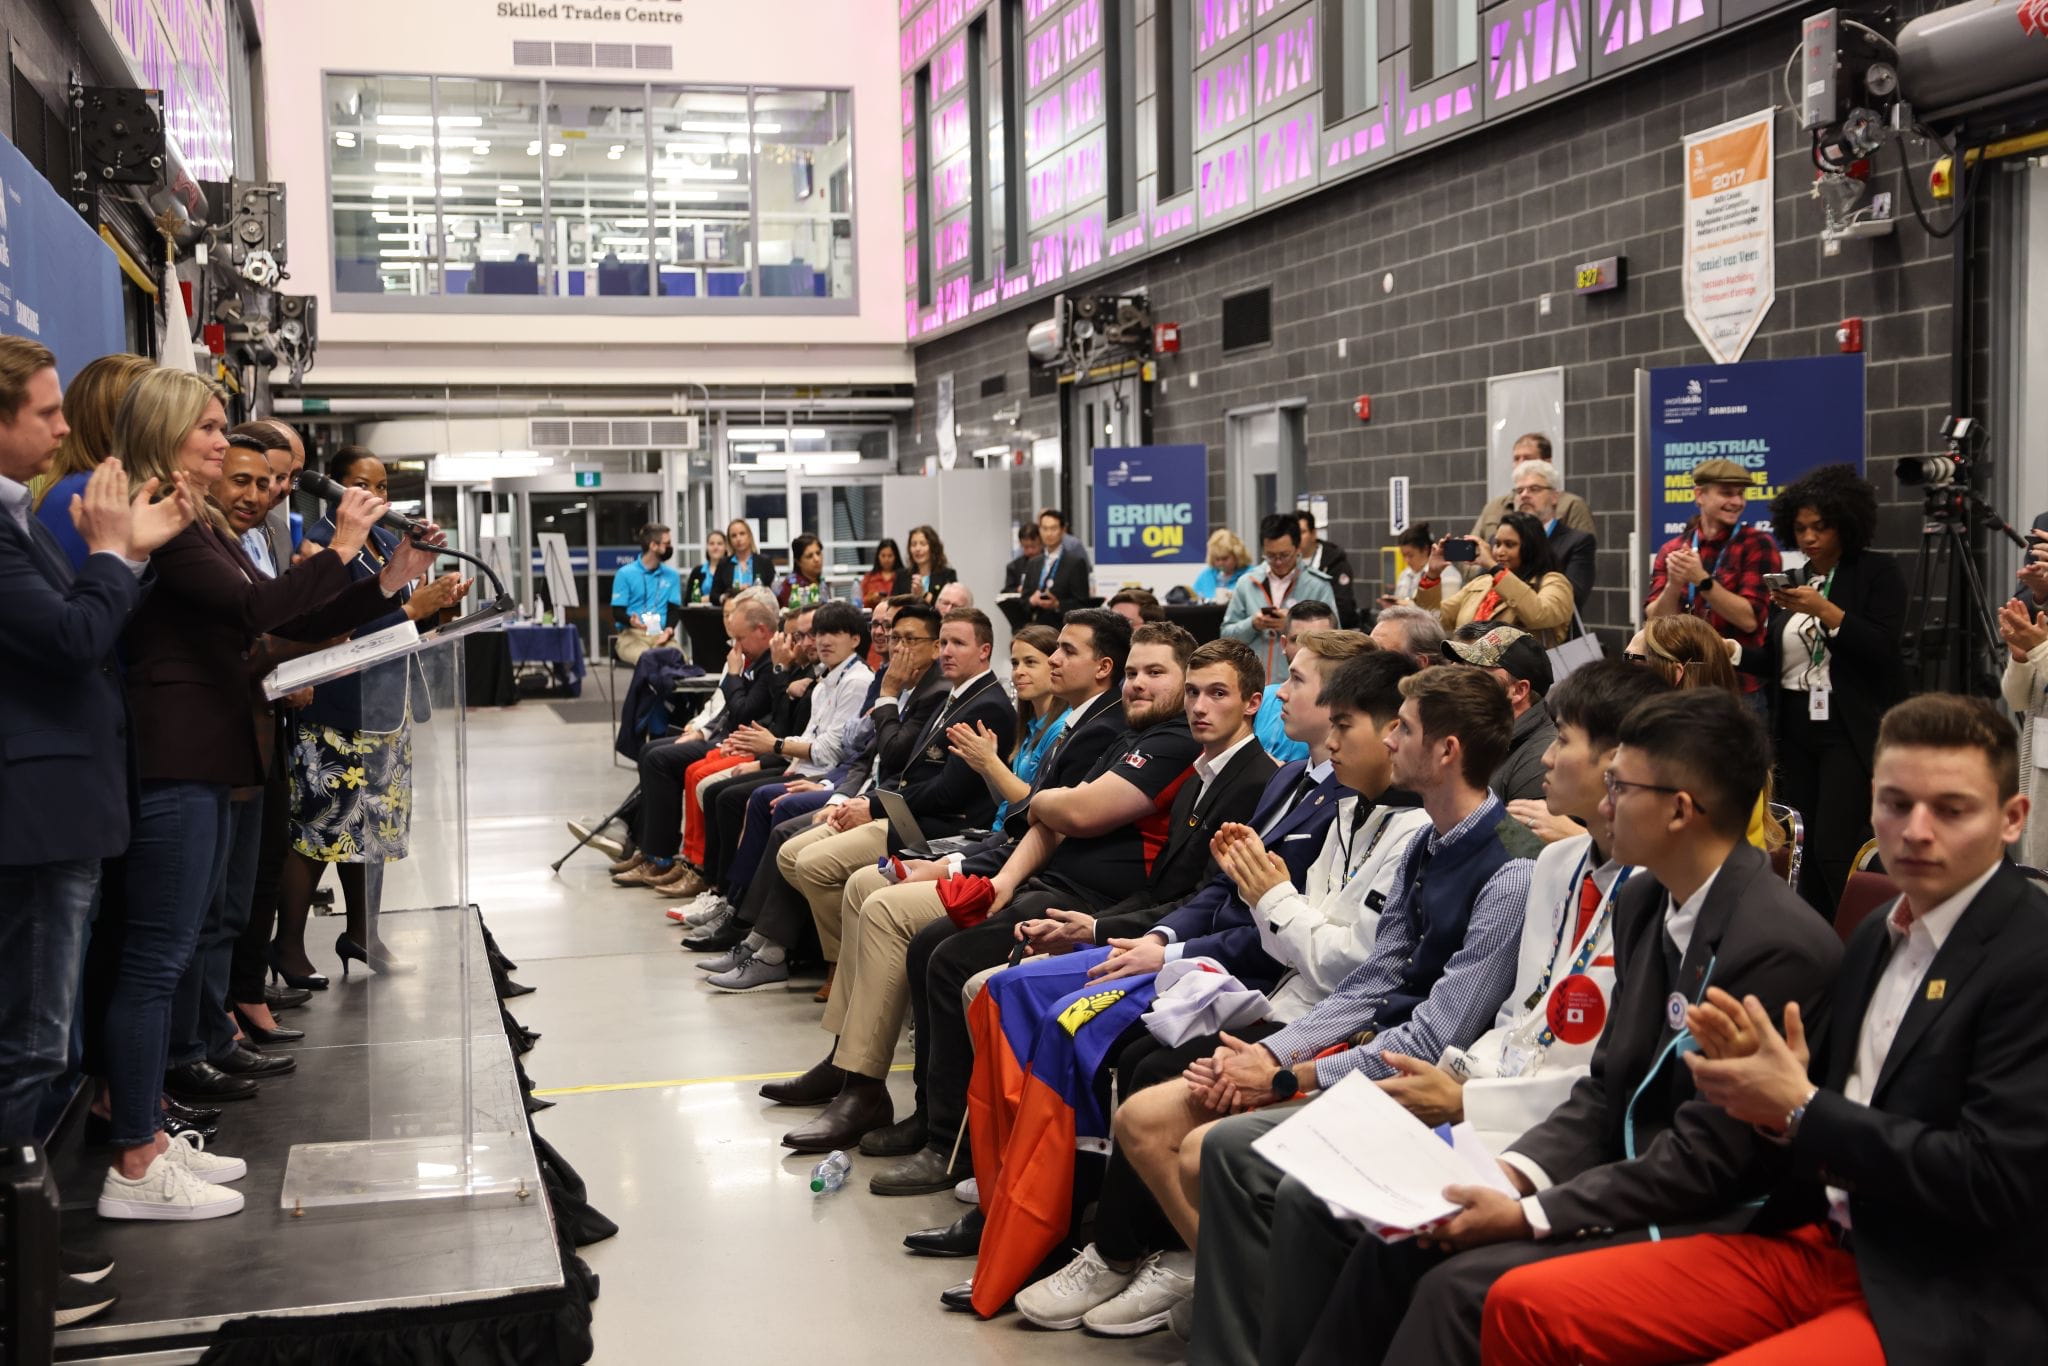 Various Ontario Members of Provincial Parliament stand in front of competitors and others during the opening ceremonies of the WorldSkills Competition 2022 Special Edition's Industrial Mechanics event.